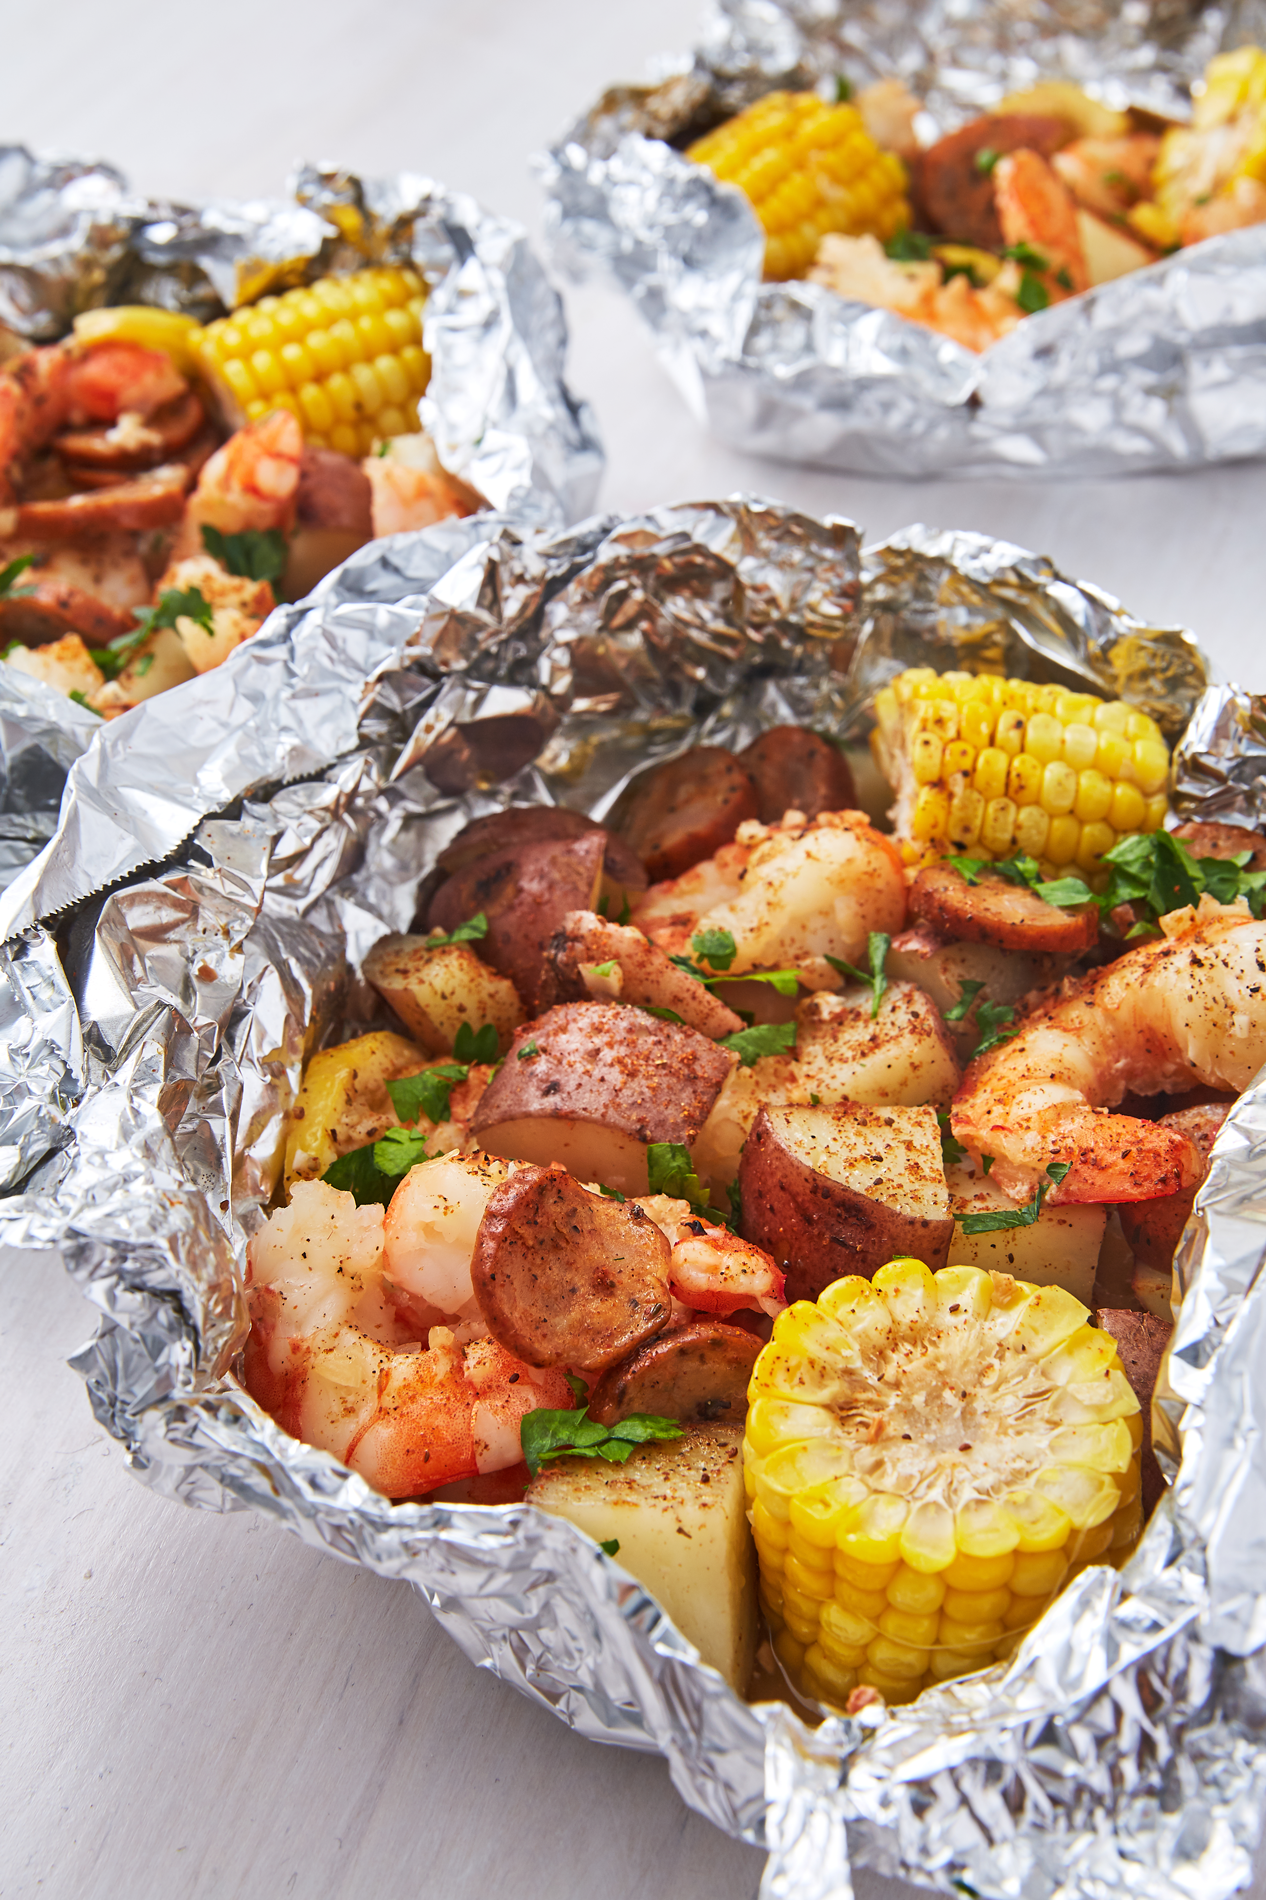 50 Easy Grilled Dinners Simple Ideas For Dinner On The Grill